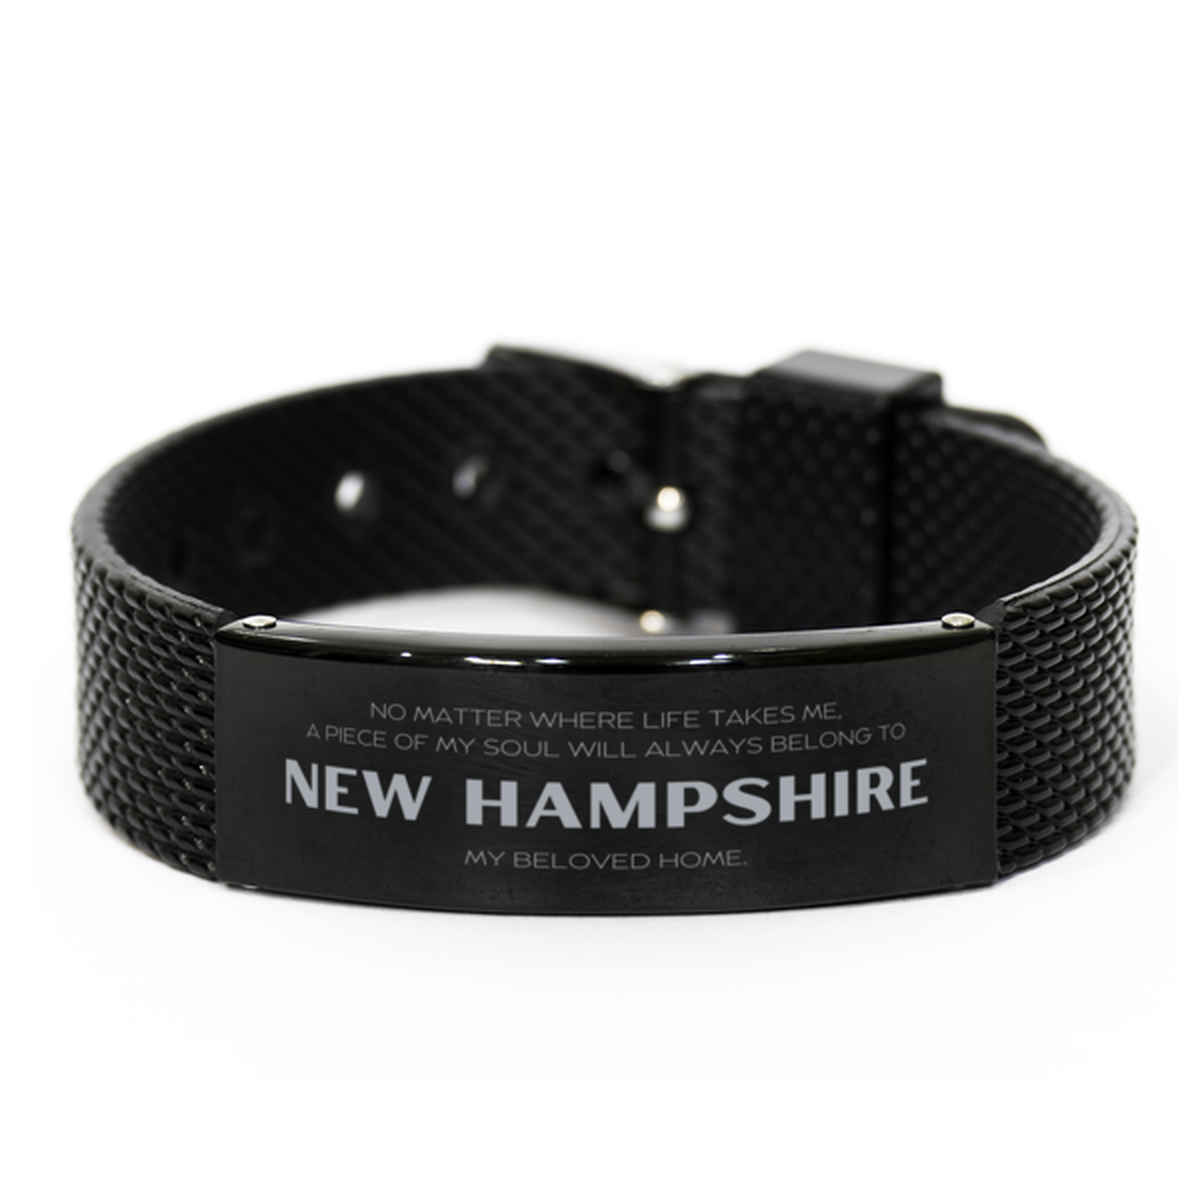 Love New Hampshire State Gifts, My soul will always belong to New Hampshire, Proud Black Shark Mesh Bracelet, Birthday Unique Gifts For New Hampshire Men, Women, Friends